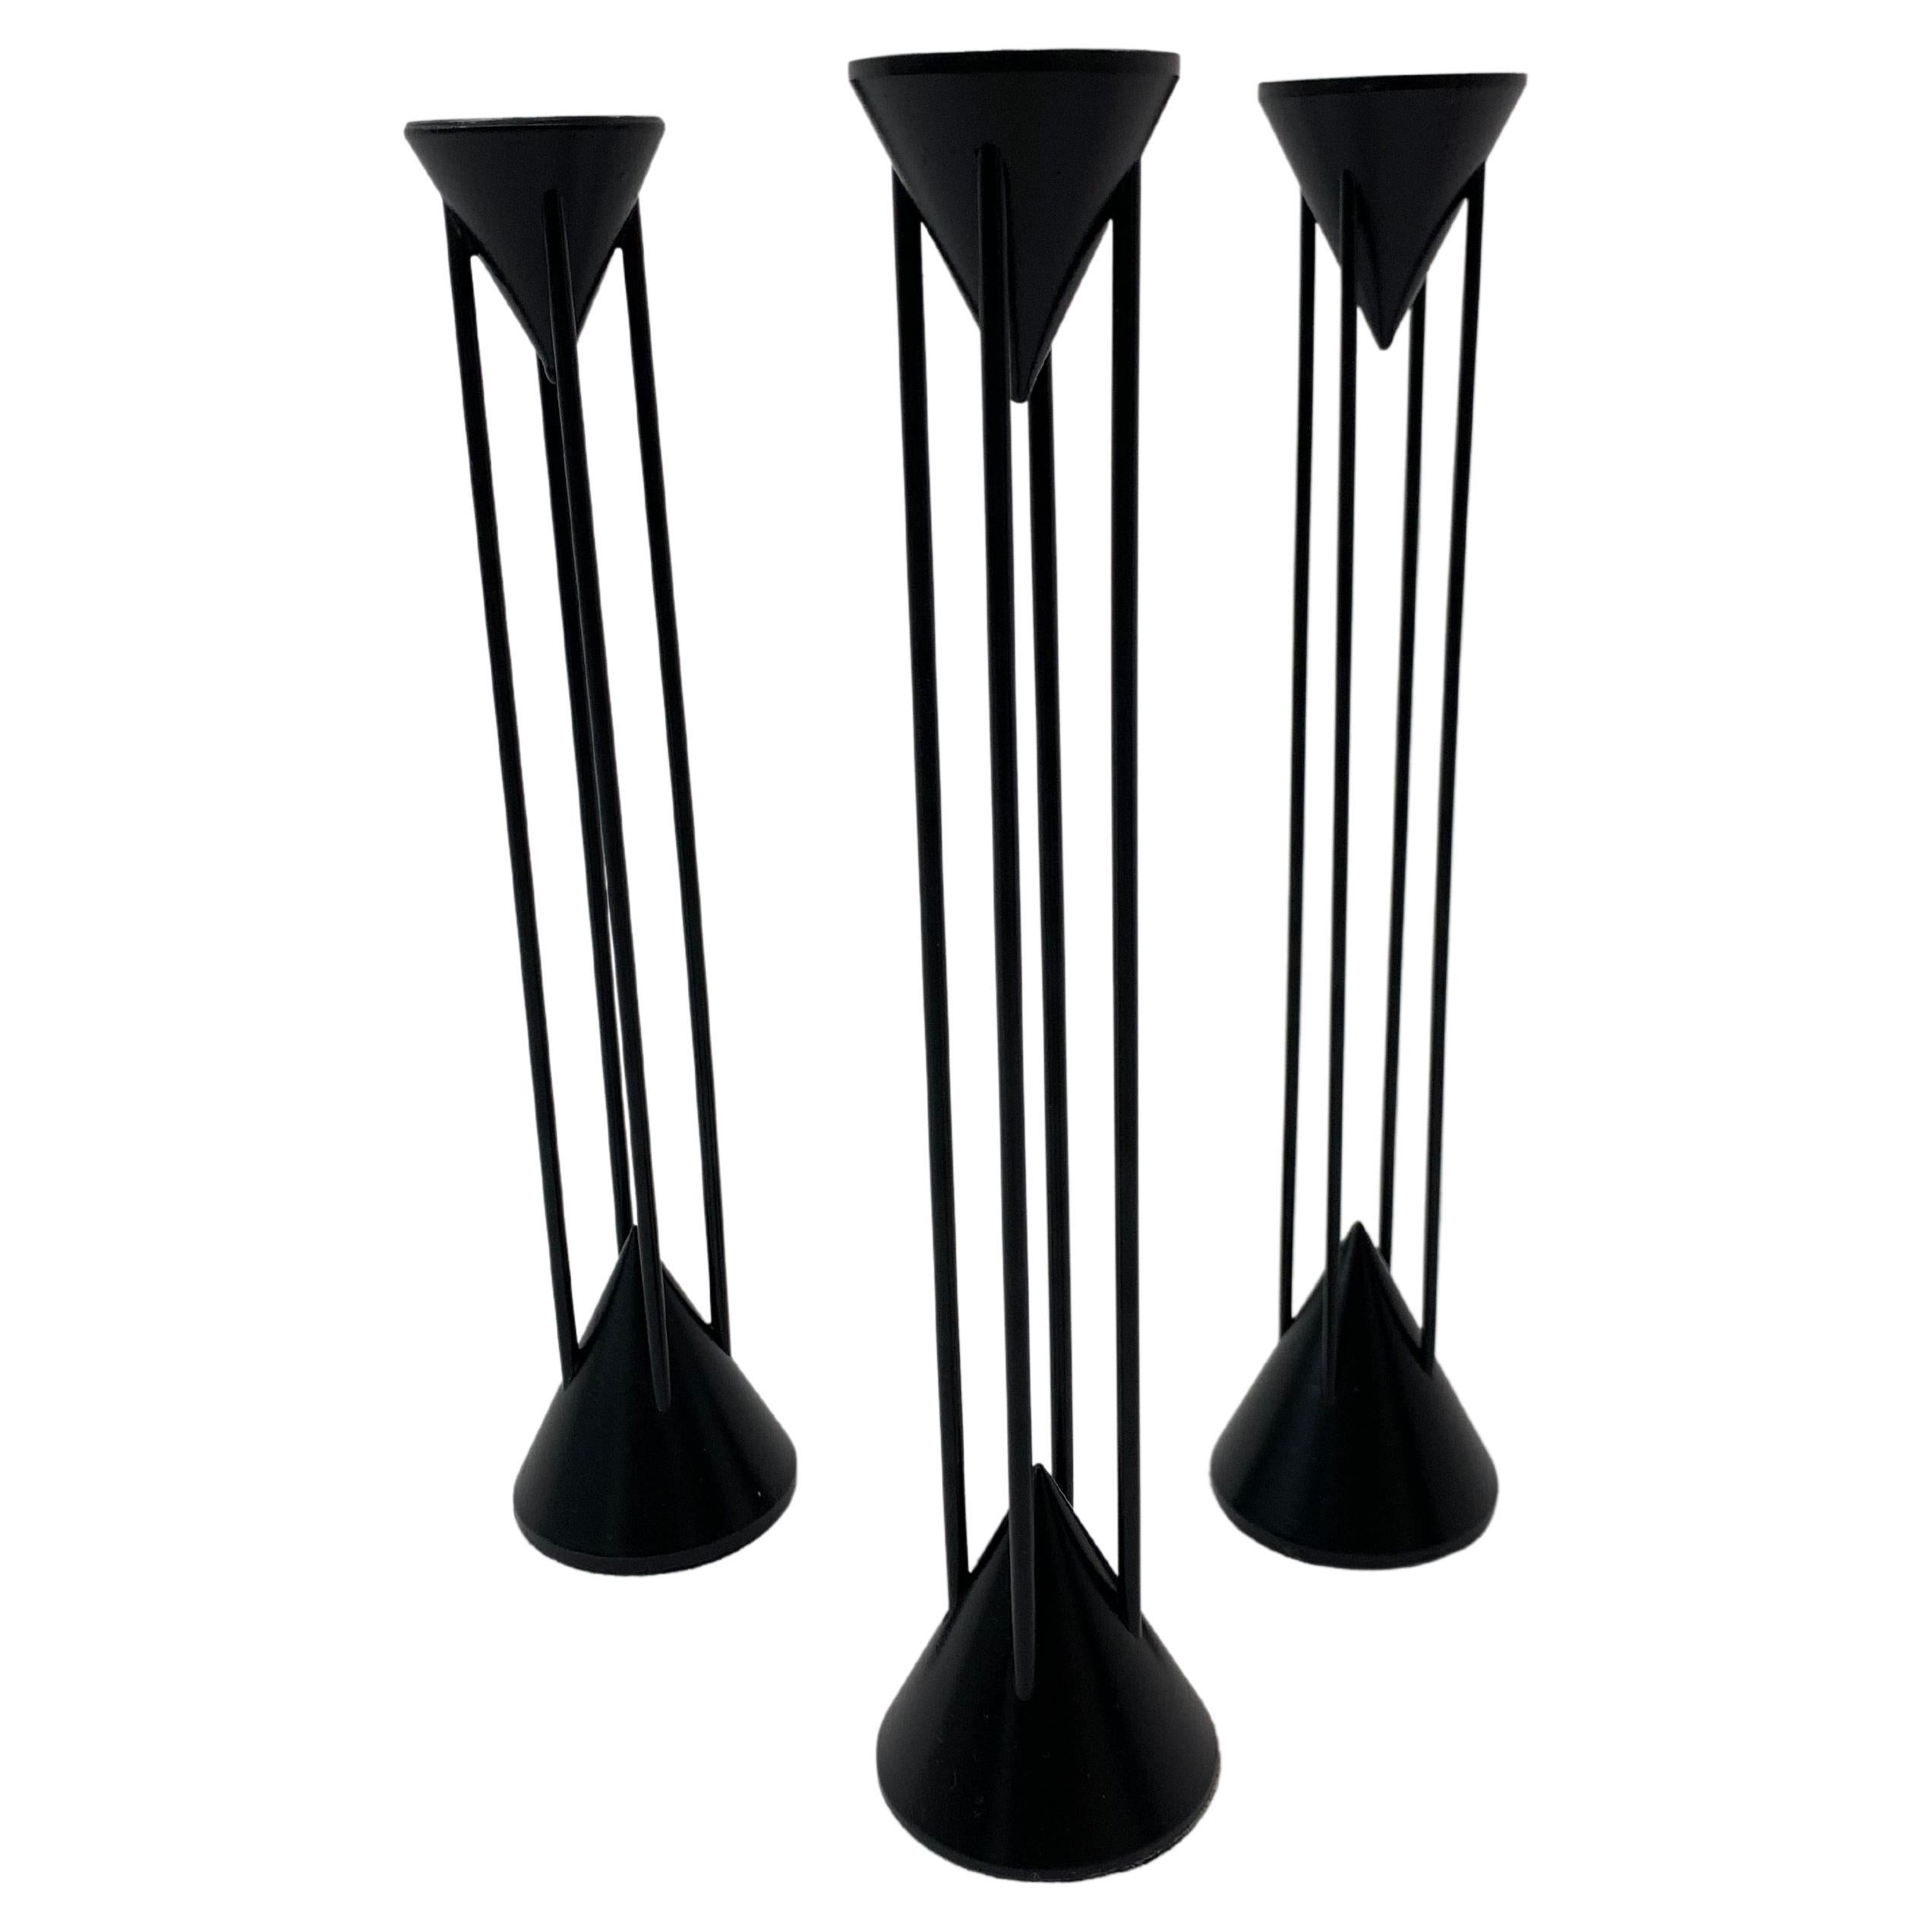 Set of 3 Post-Modern Memphis Candle Sticks by Markus Borgens, 1980s For Sale